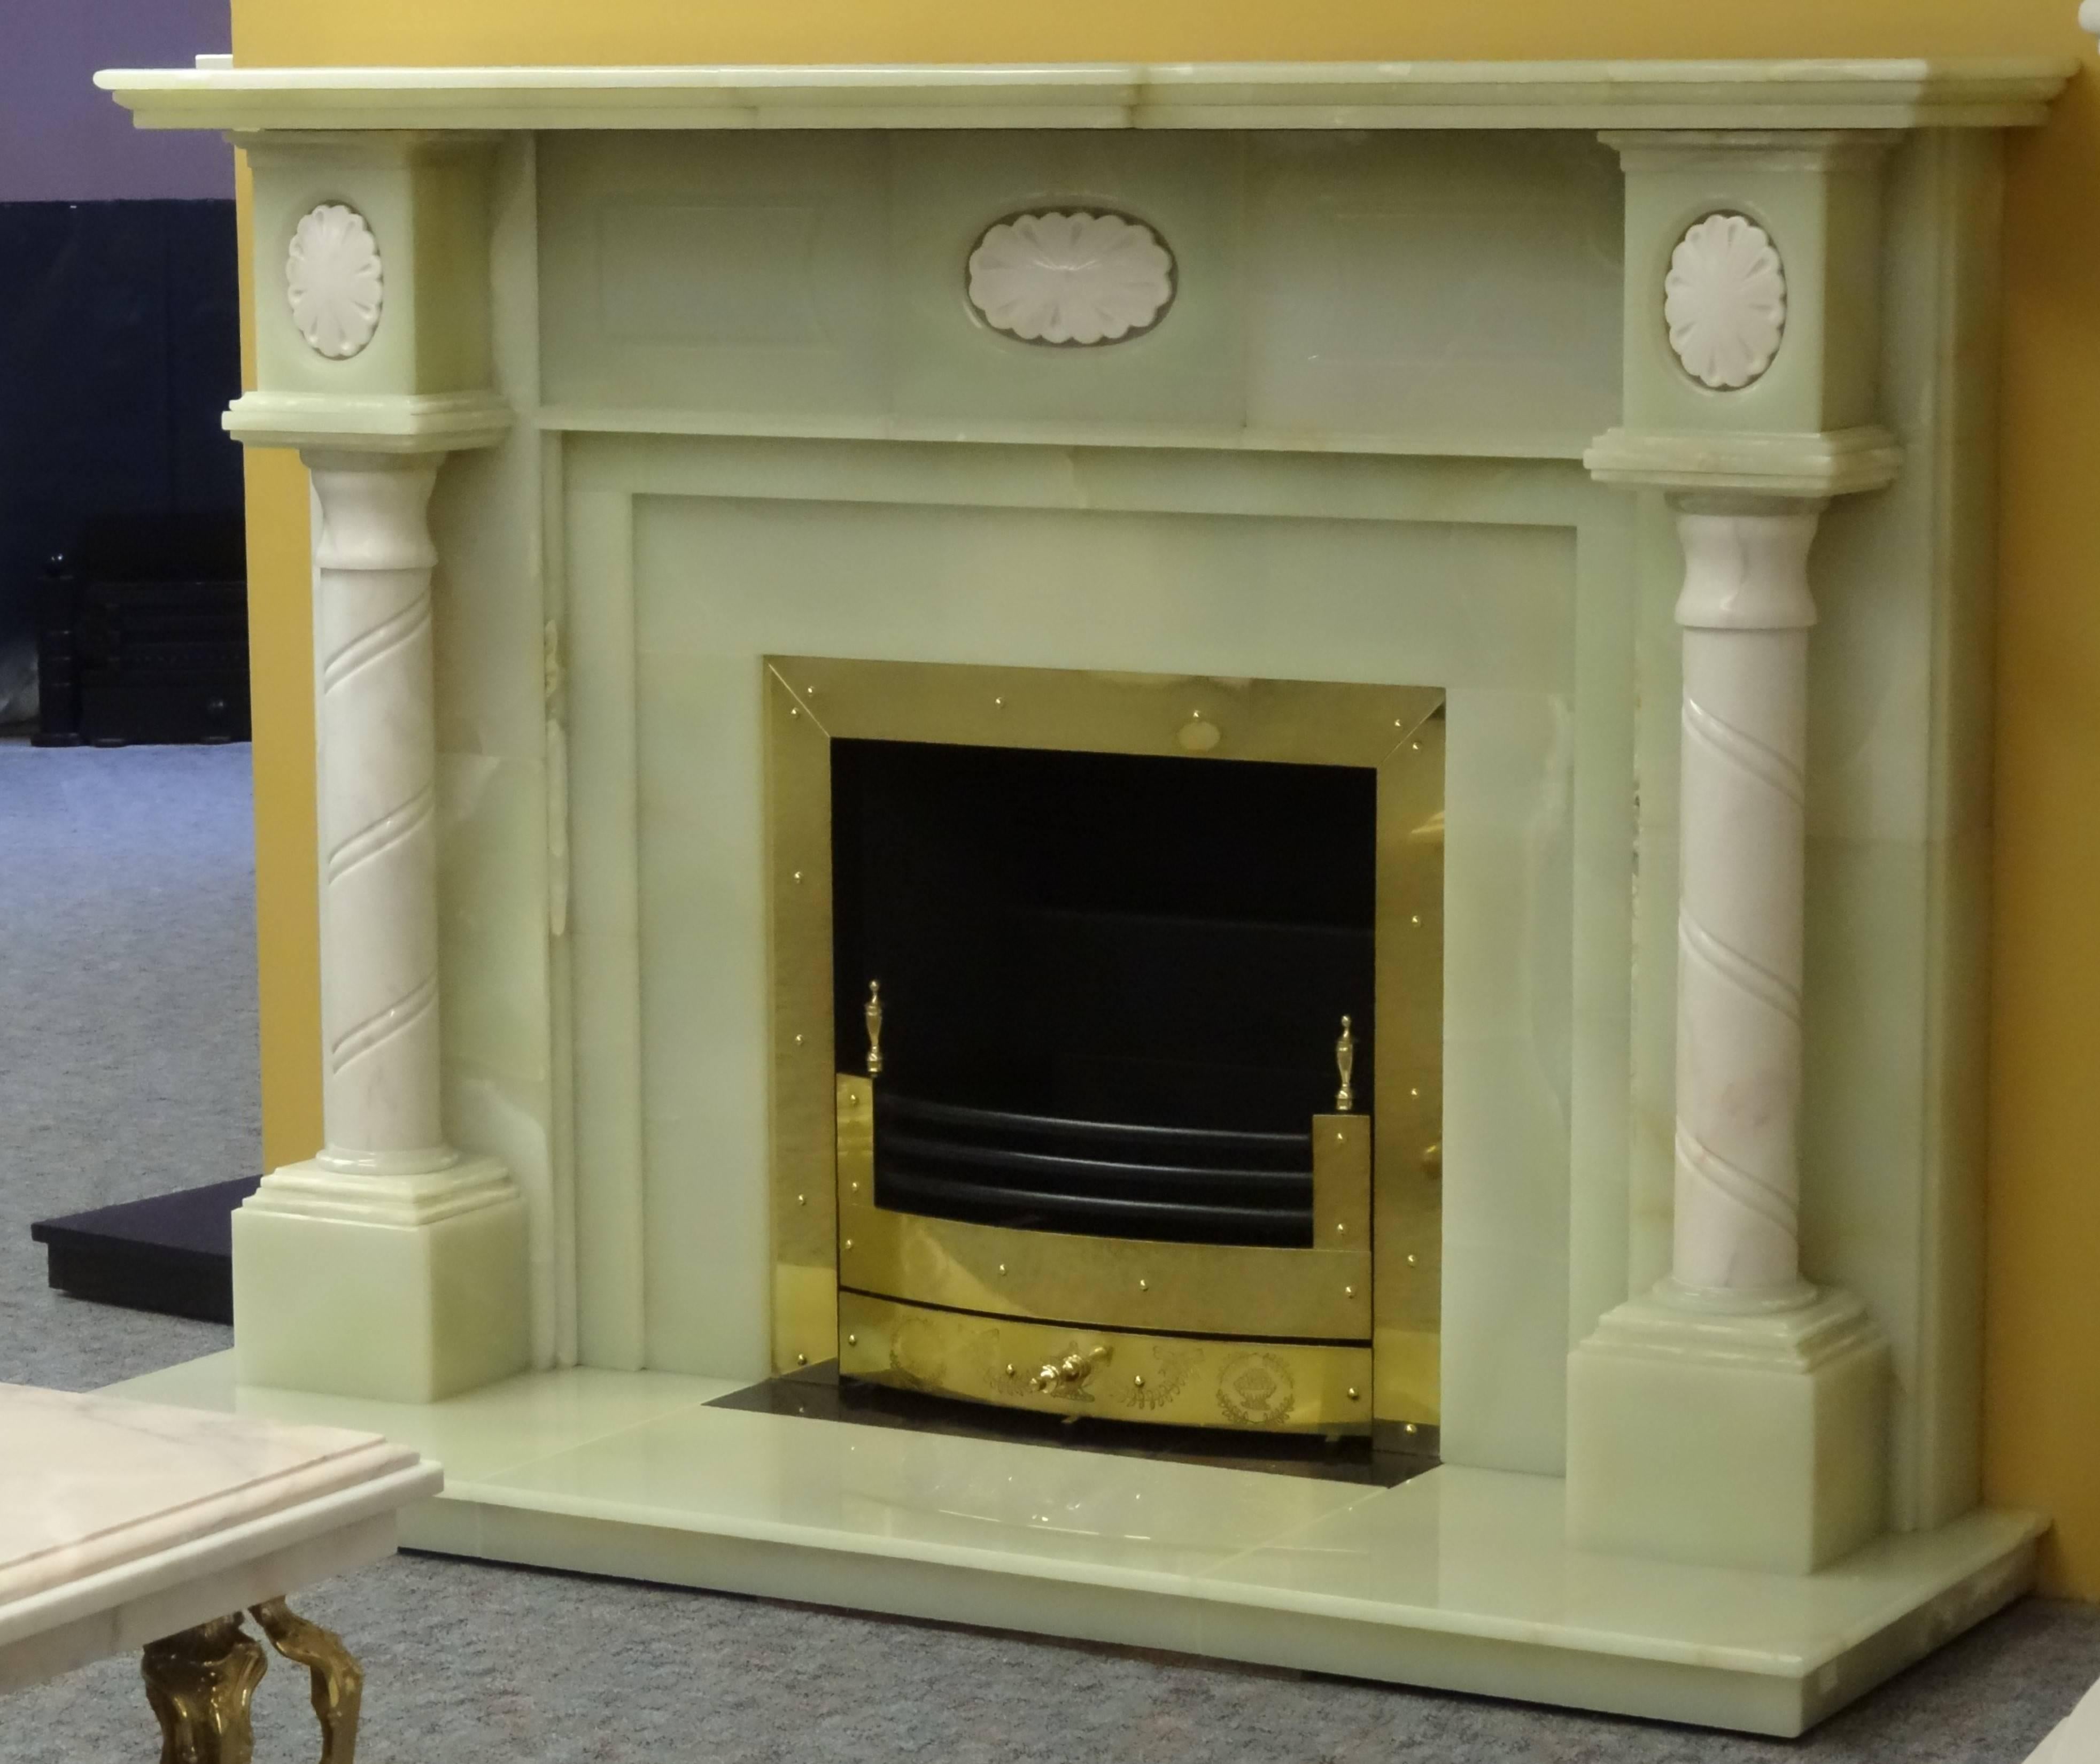 We created this Georgian style fireplace from beautiful semi precious green onyx slabs, the columns and cameos are carved from Rosa Aurora marble. The fireplace comprises of matching onyx hearth, onyx insert with built in satin finished brass frame